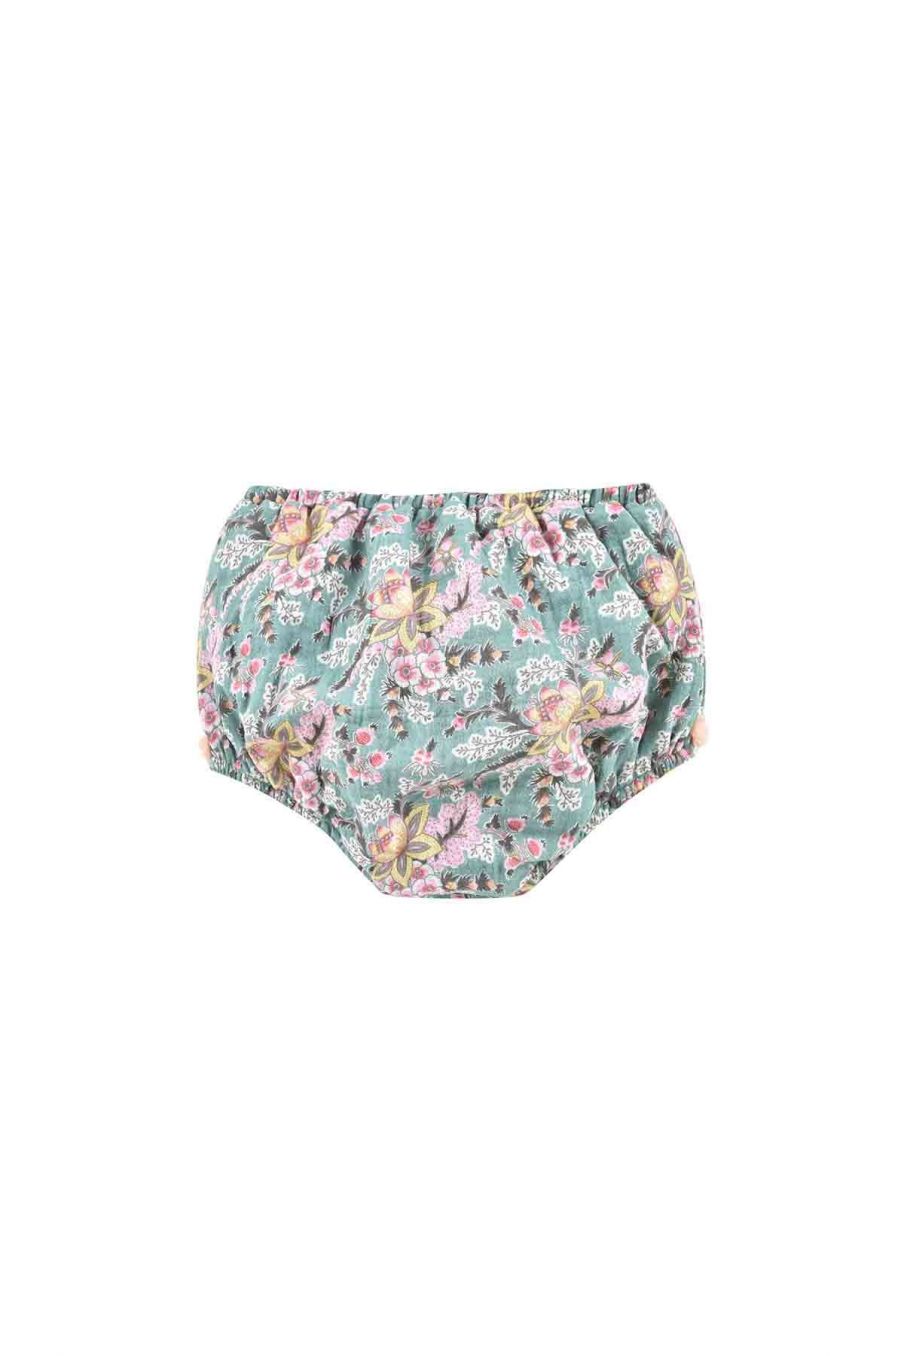 bloomers bebe fille valentine blue french flowers - louise misha